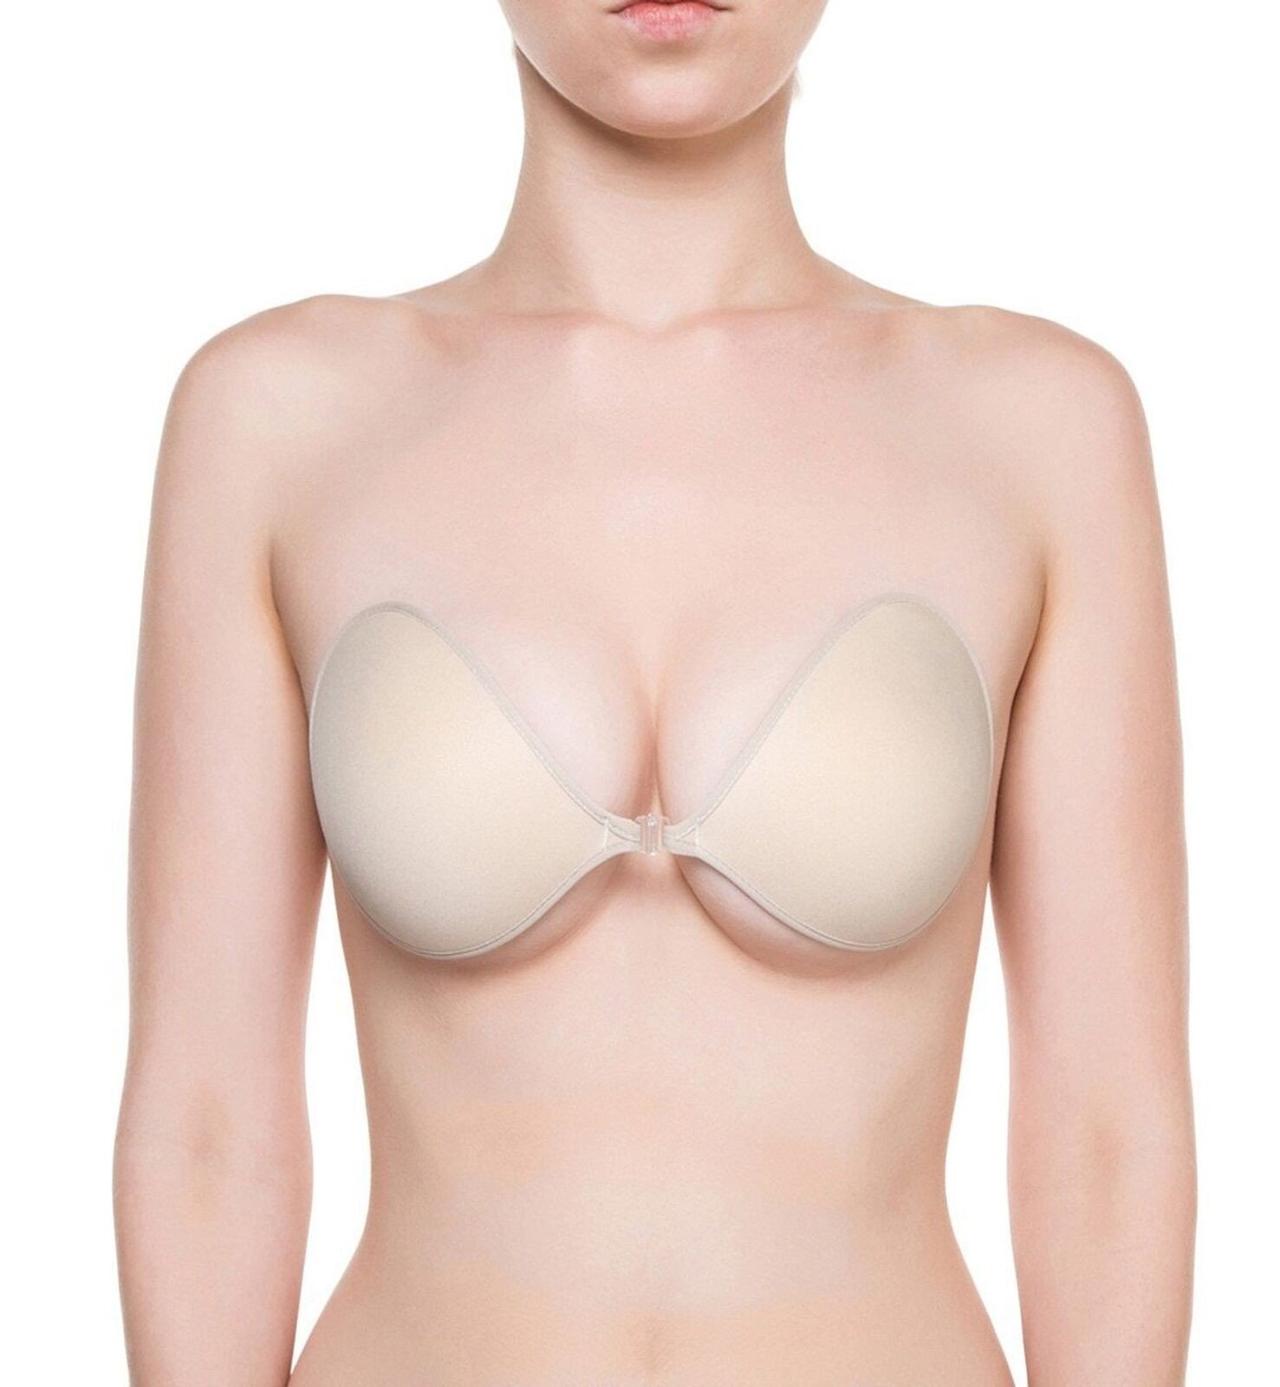 ALING Invisible Push-up Silicone Bra Strapless Backless Bra Women